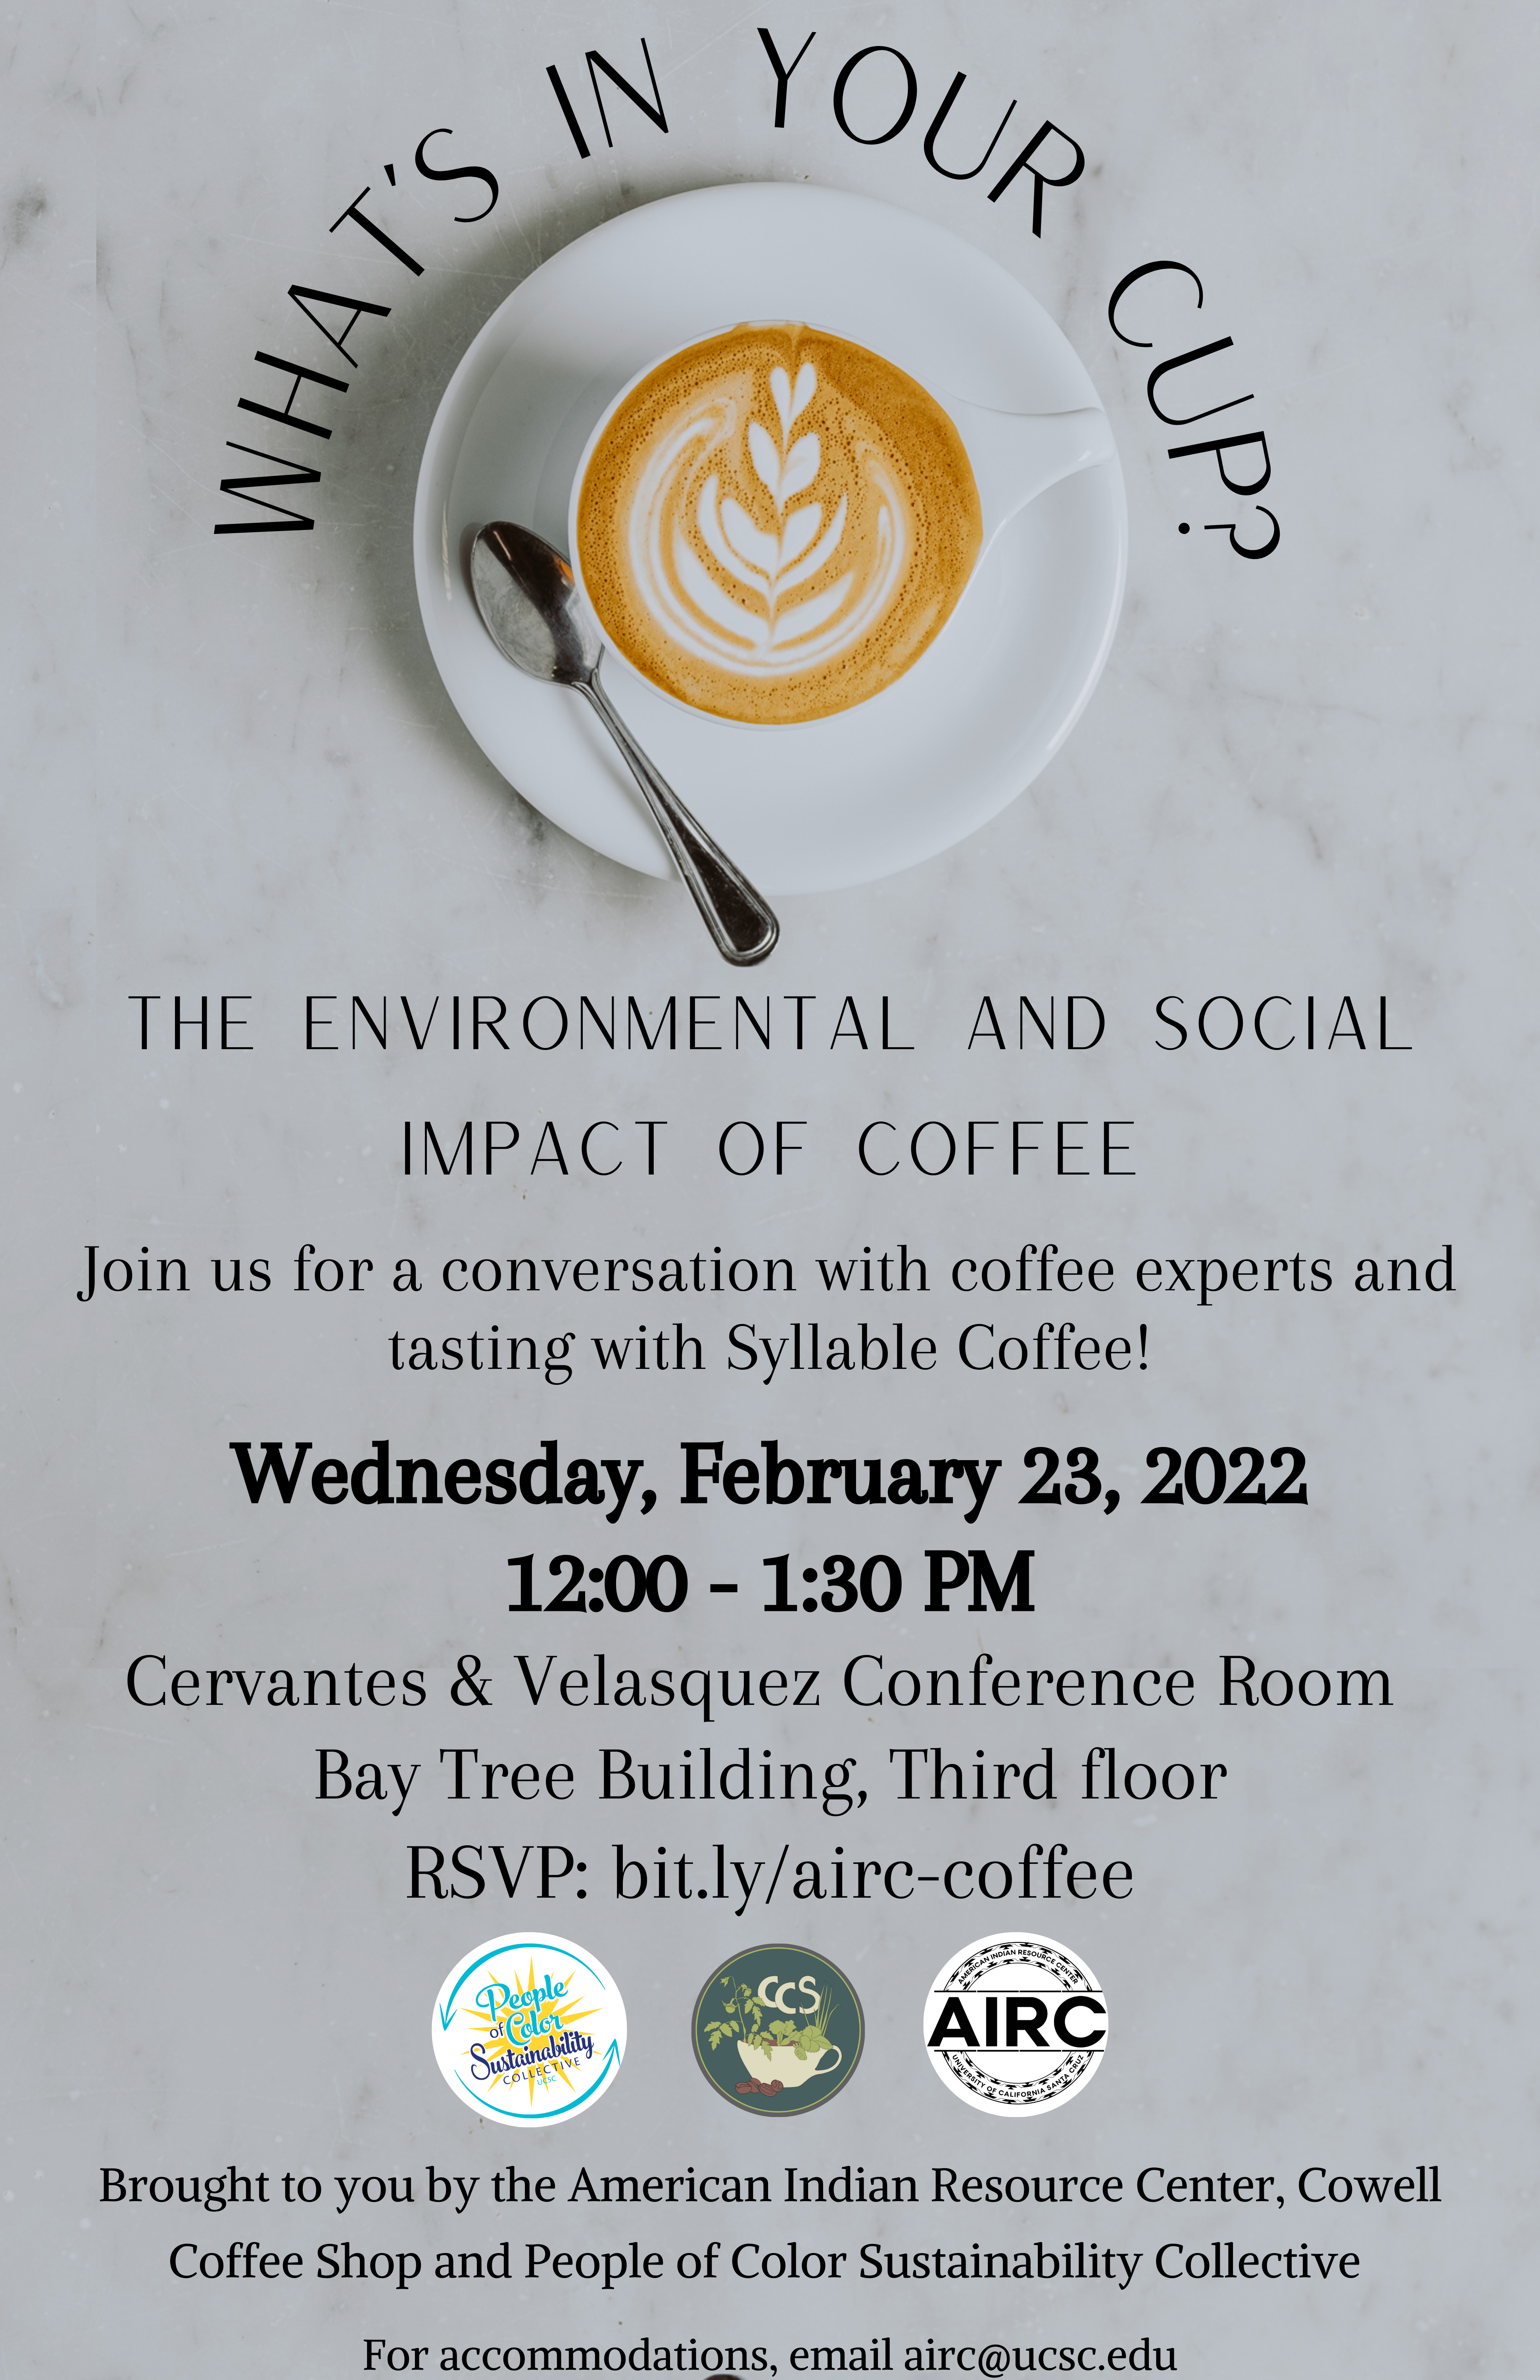 What's in Your Cup? The Environmental and Social Impact of Coffee